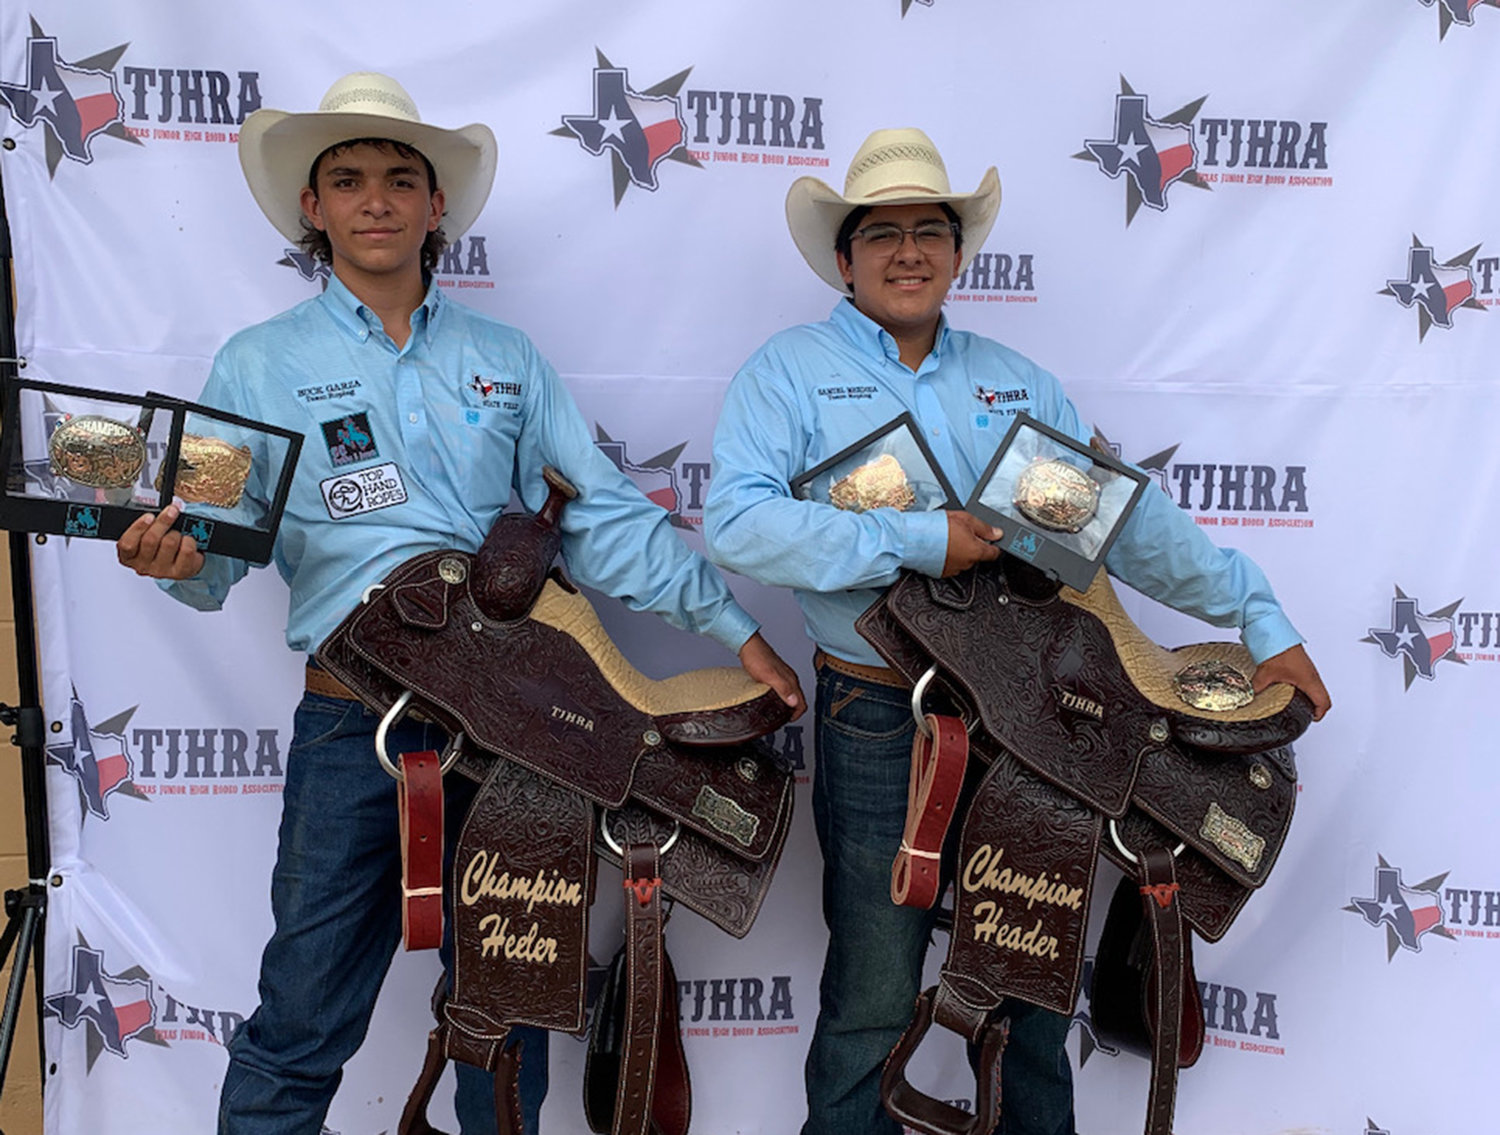 Team ropers Buck Garza (left) and his teammate Samuel Mendoza of Carrizo Springs proudly celebrate their victory at the TJHRA finals last Friday.